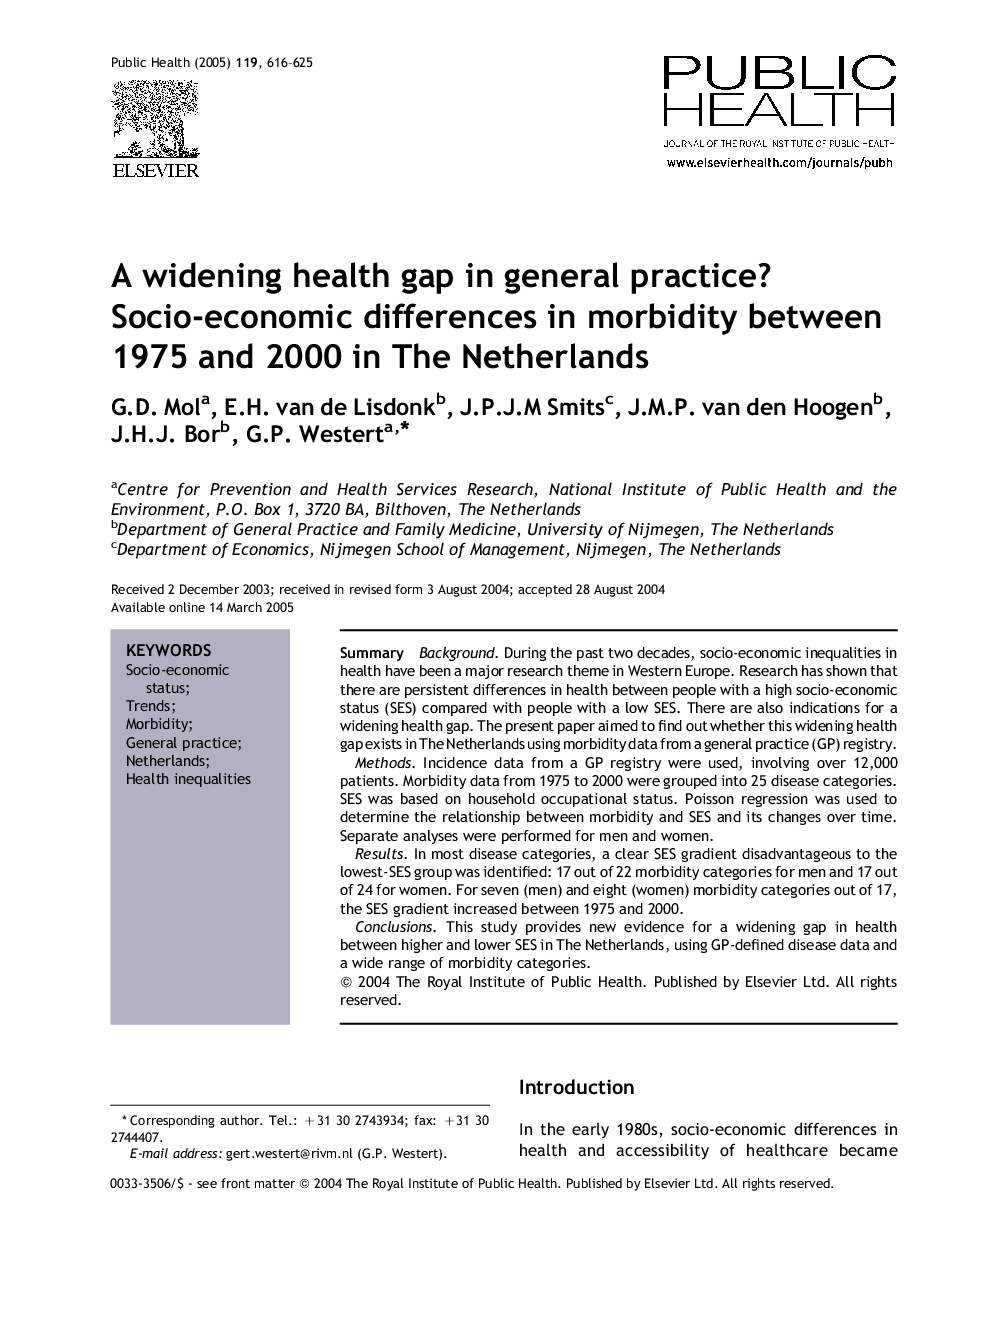 A widening health gap in general practice? Socio-economic differences in morbidity between 1975 and 2000 in The Netherlands